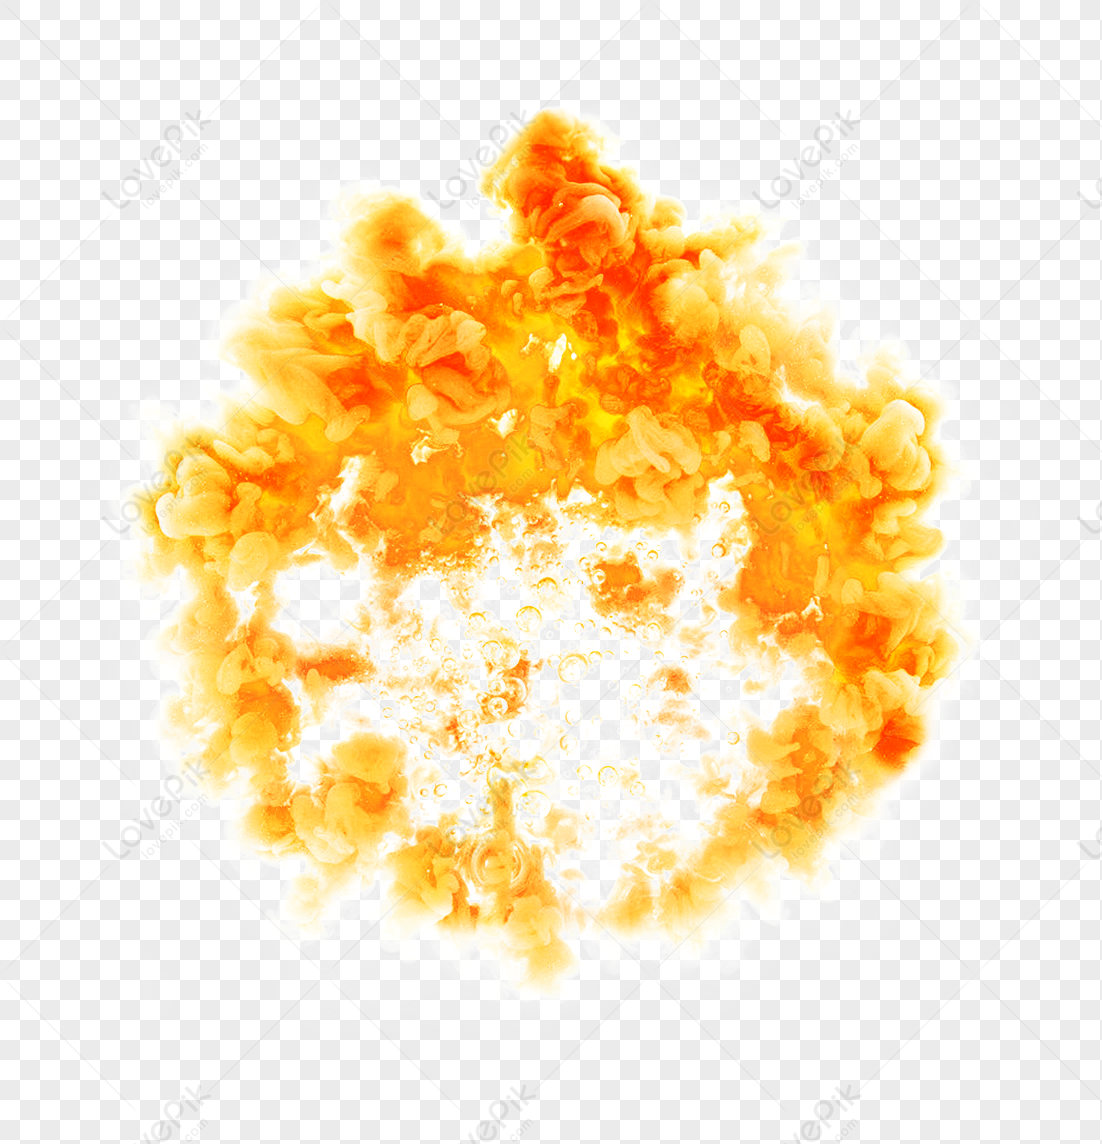 Orange Smoke Effect Element PNG Transparent Background And Clipart Image  For Free Download - Lovepik | 401511350